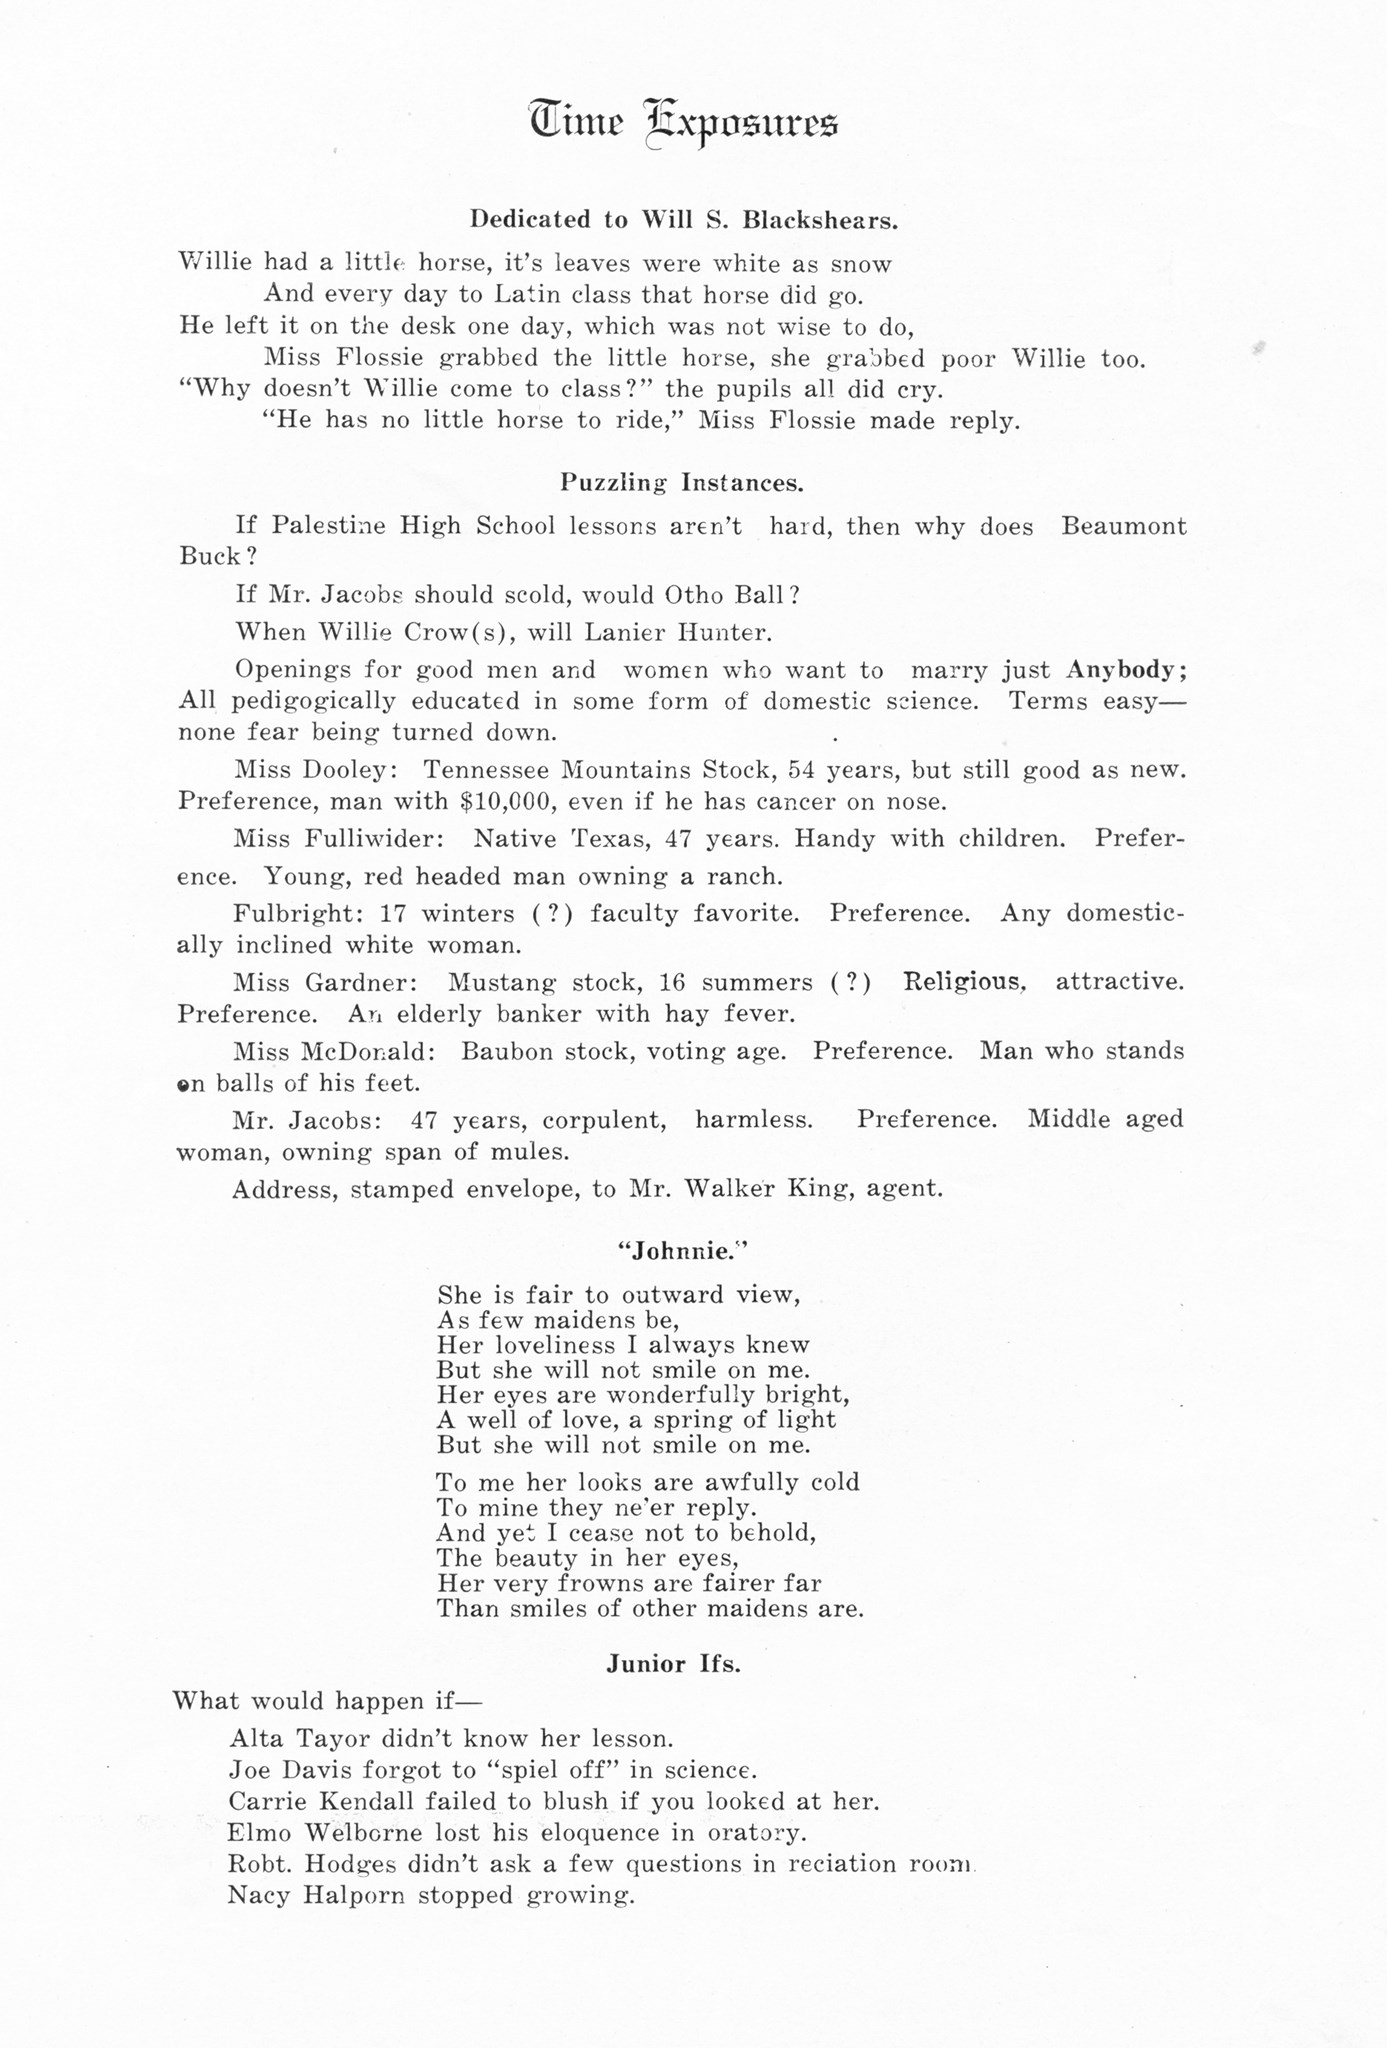 ../../../Images/Large/1912/Arclight-1912-pg0055.jpg